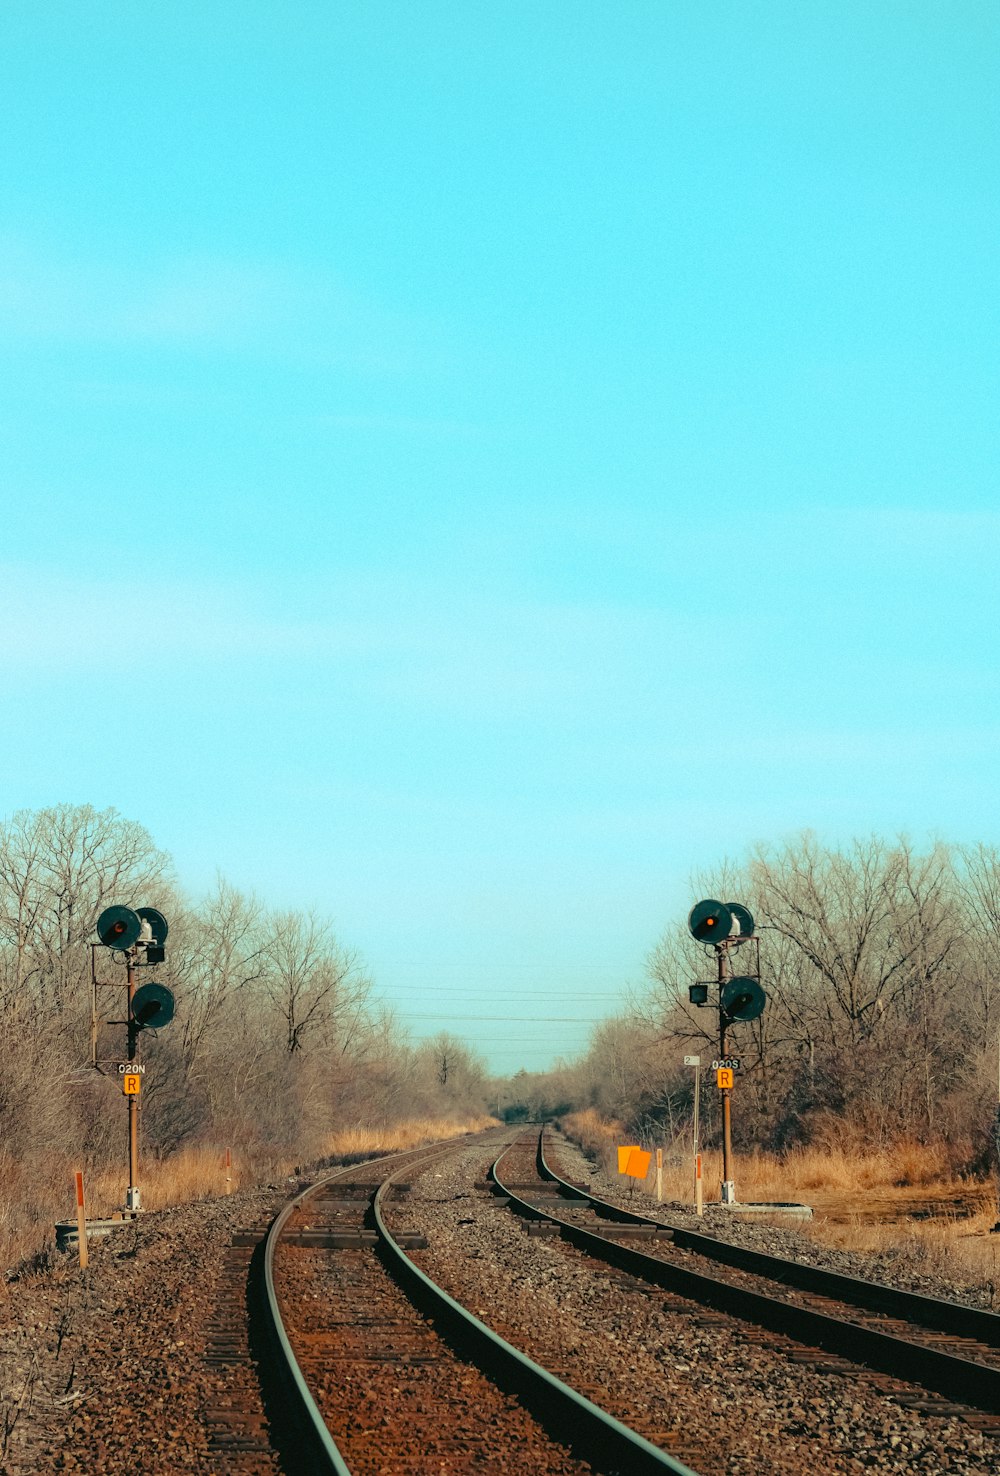 a train track with railroad crossing signals on each side